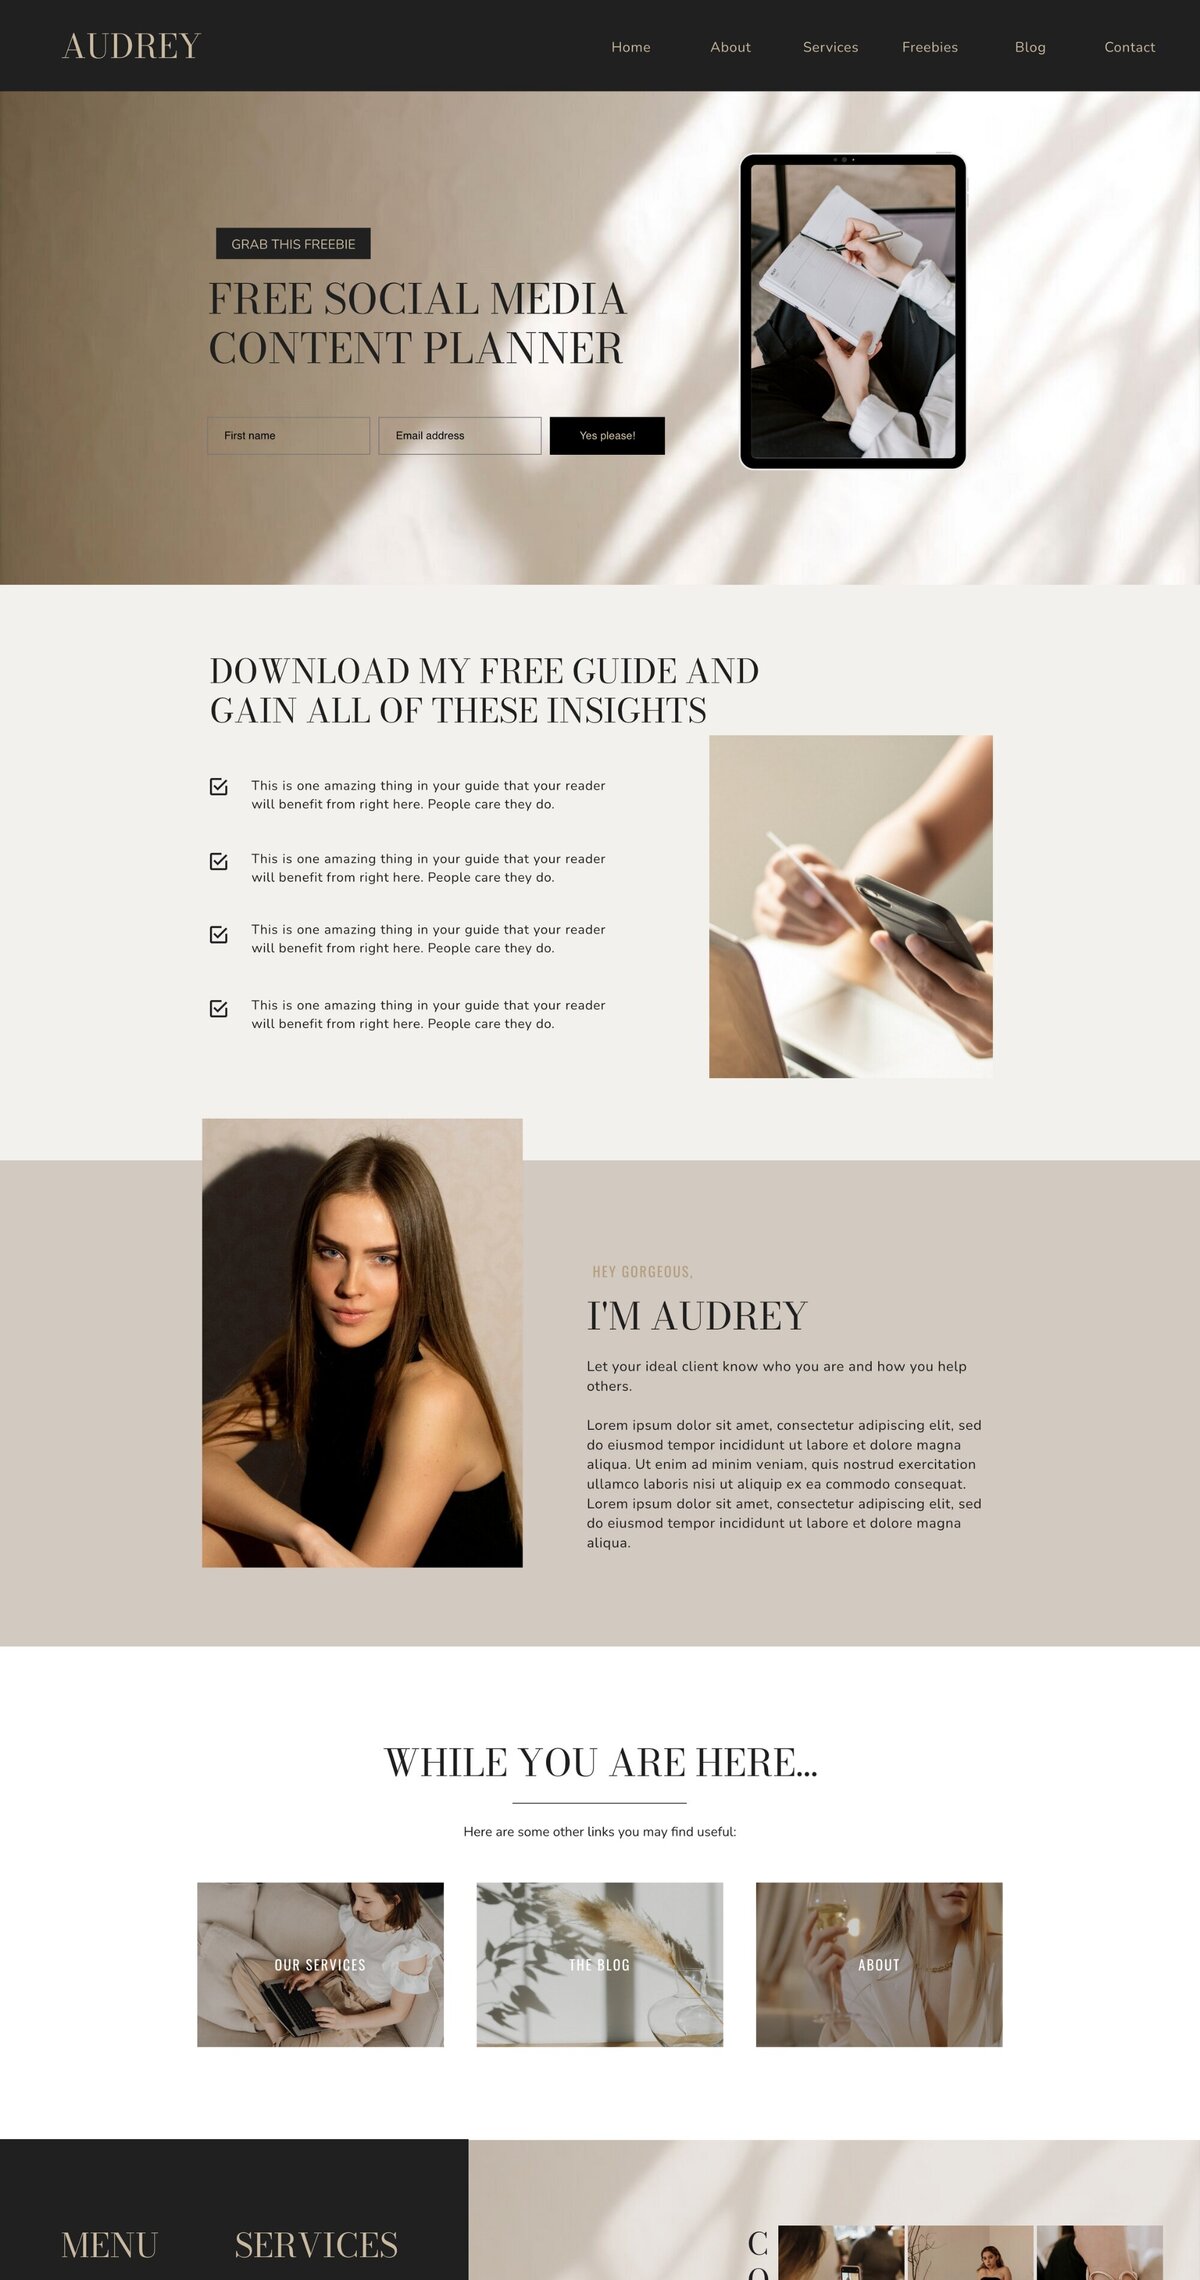 Audrey-website-opt-in-page-preview